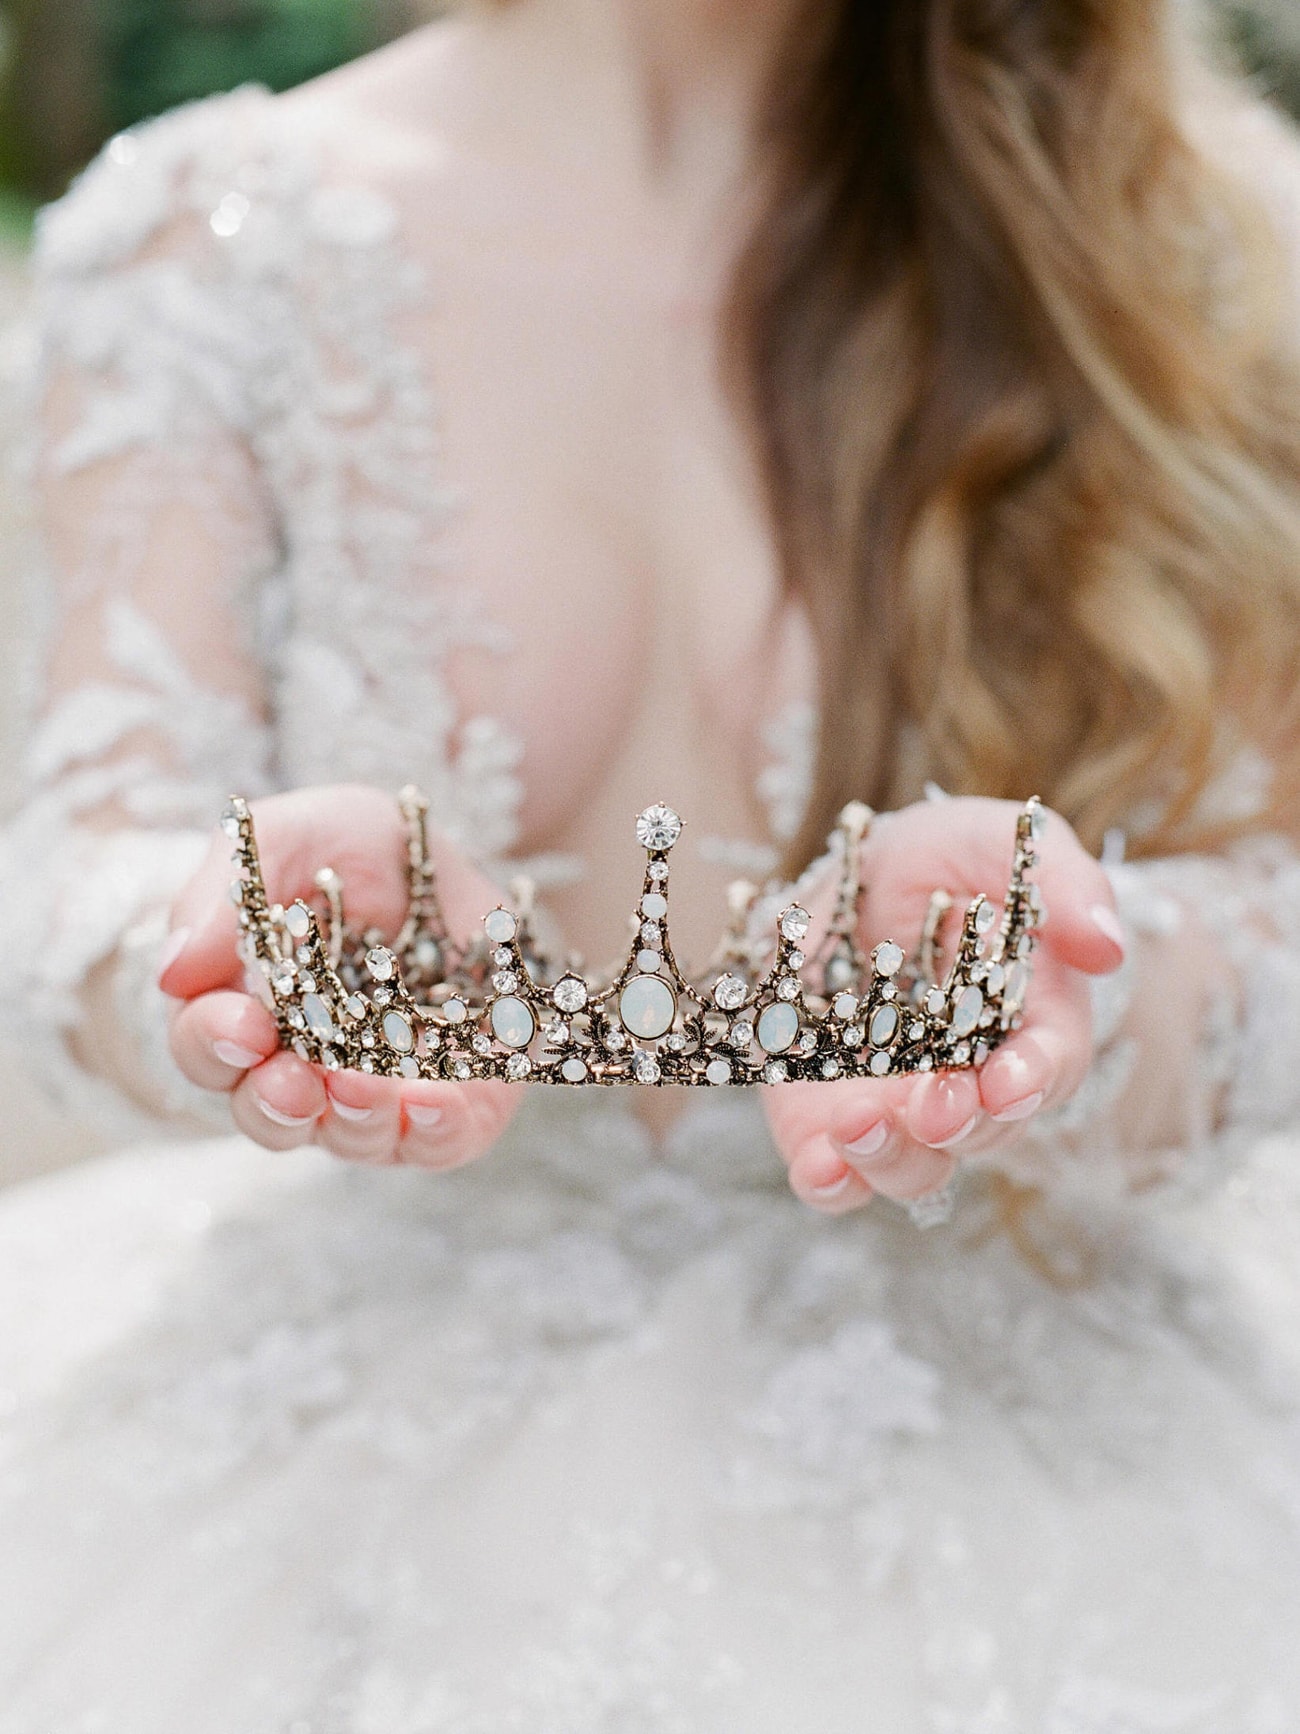 Download Fairytale Bridal Crowns & Tiaras from Eden Luxe Bridal ...